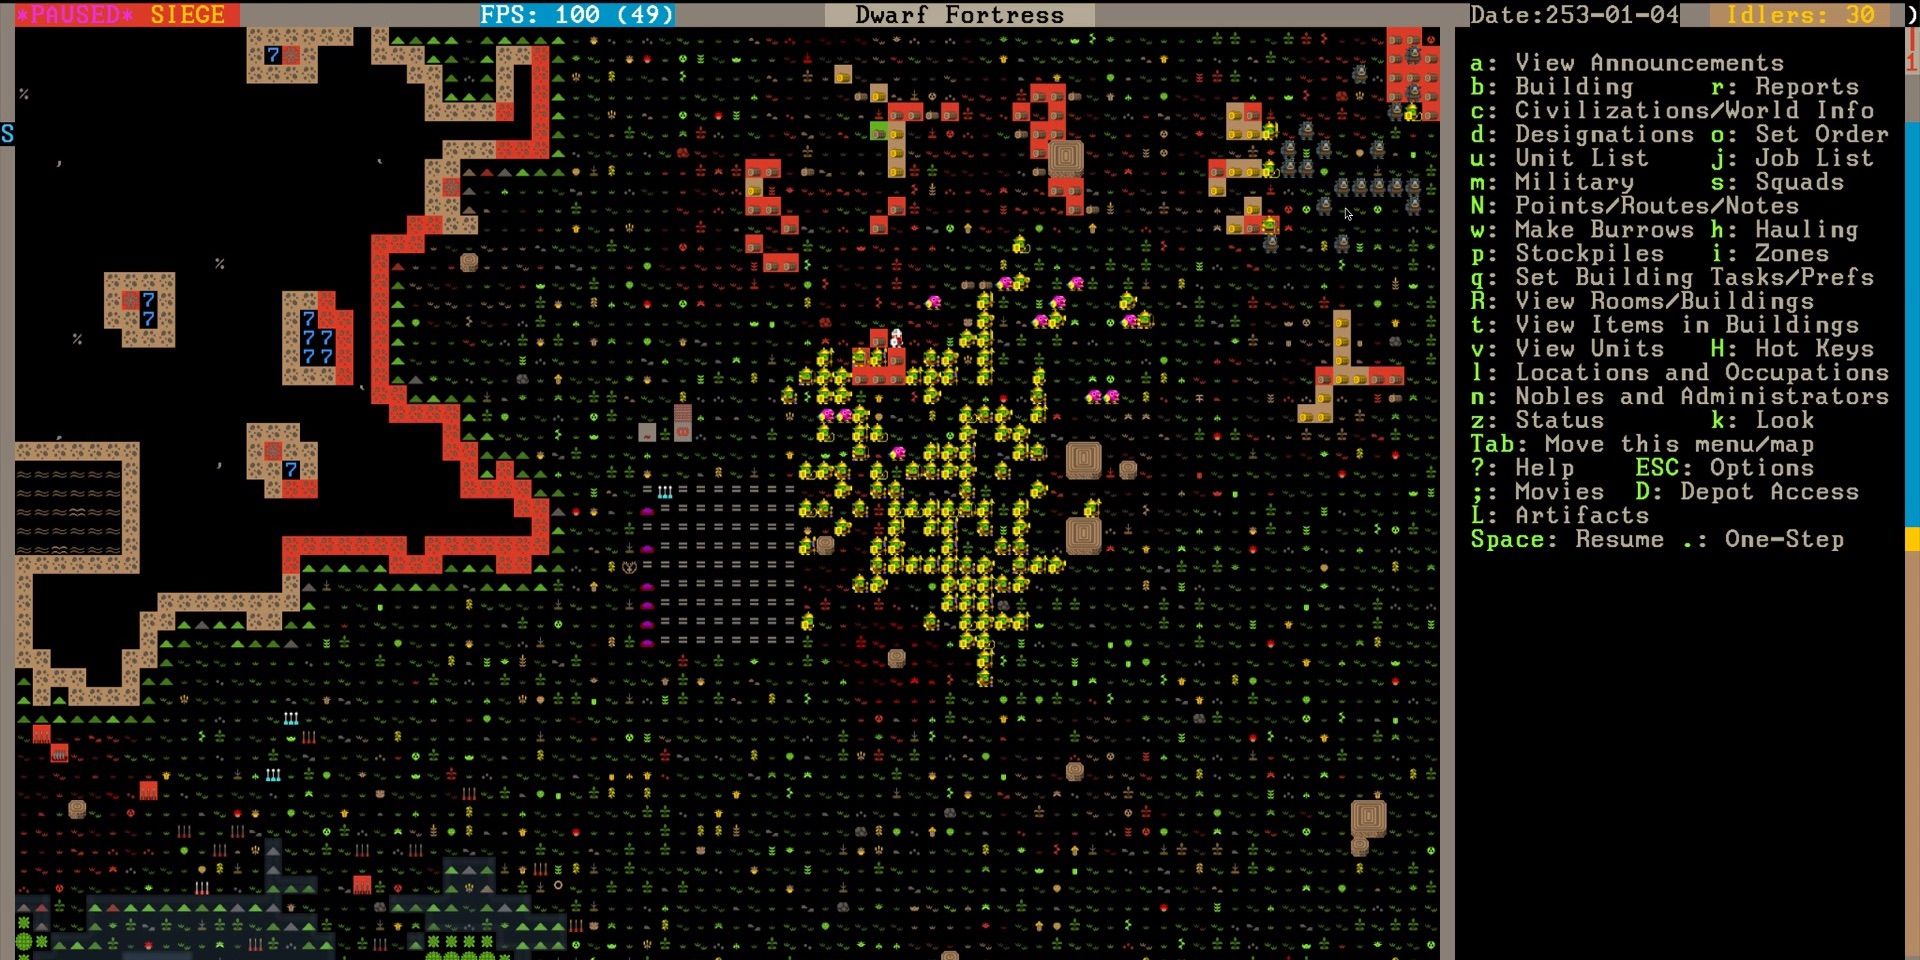 The Current State of Dwarf Fortress